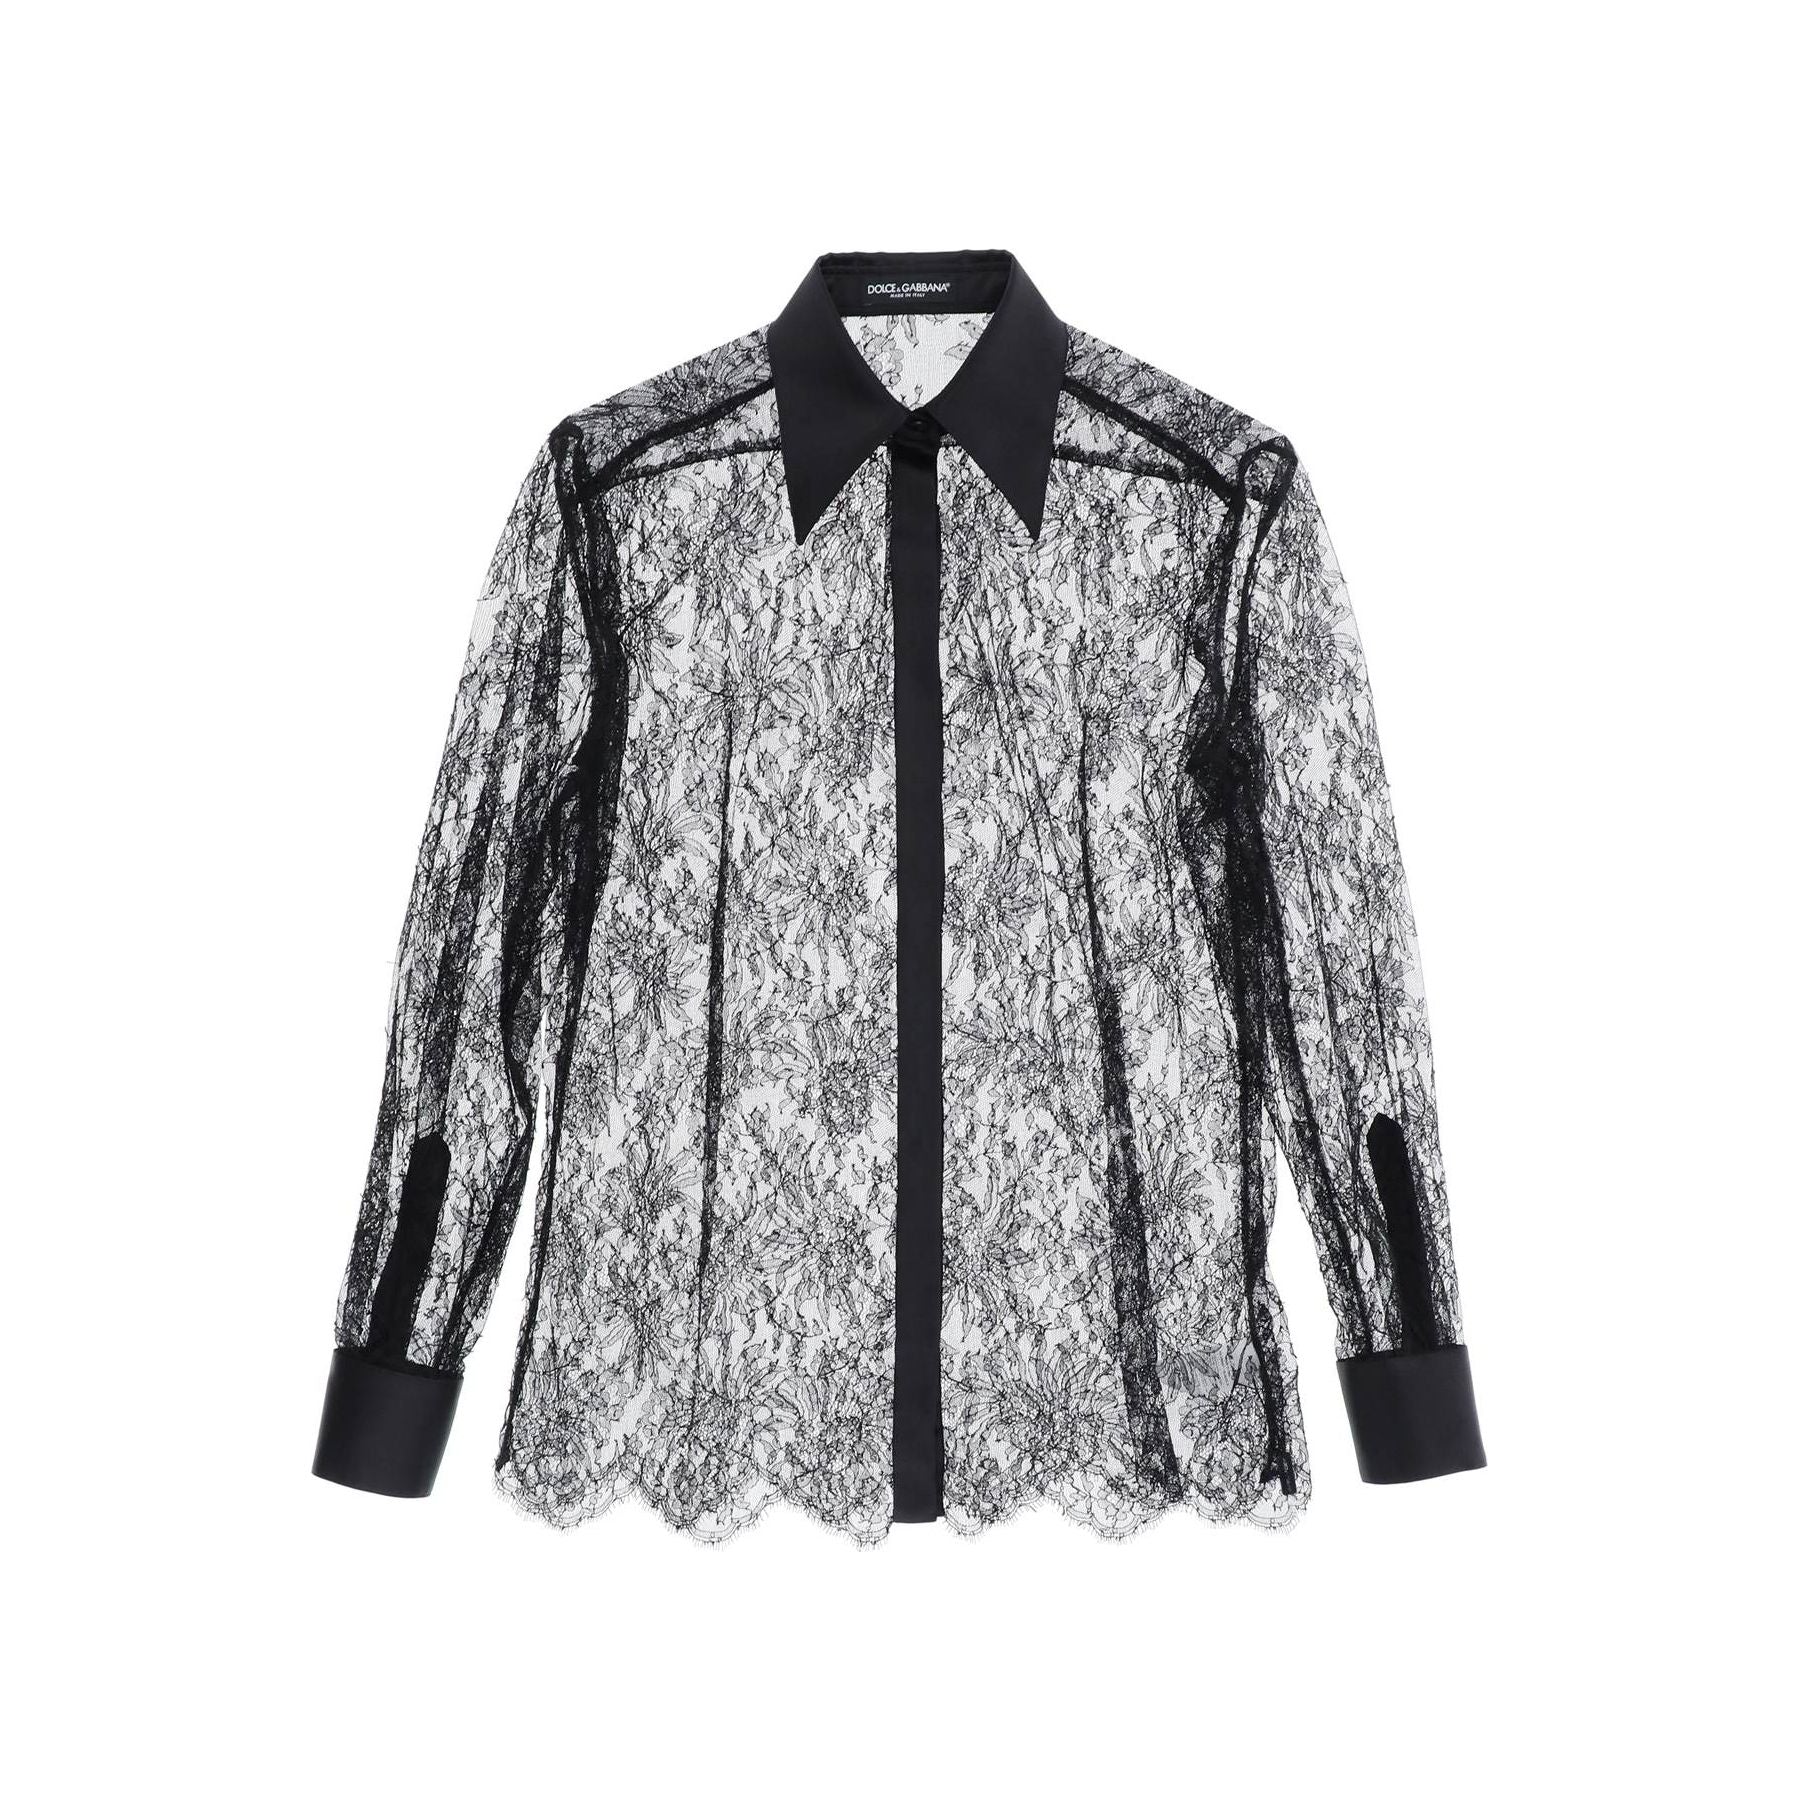 Floral Chantilly Lace Shirt